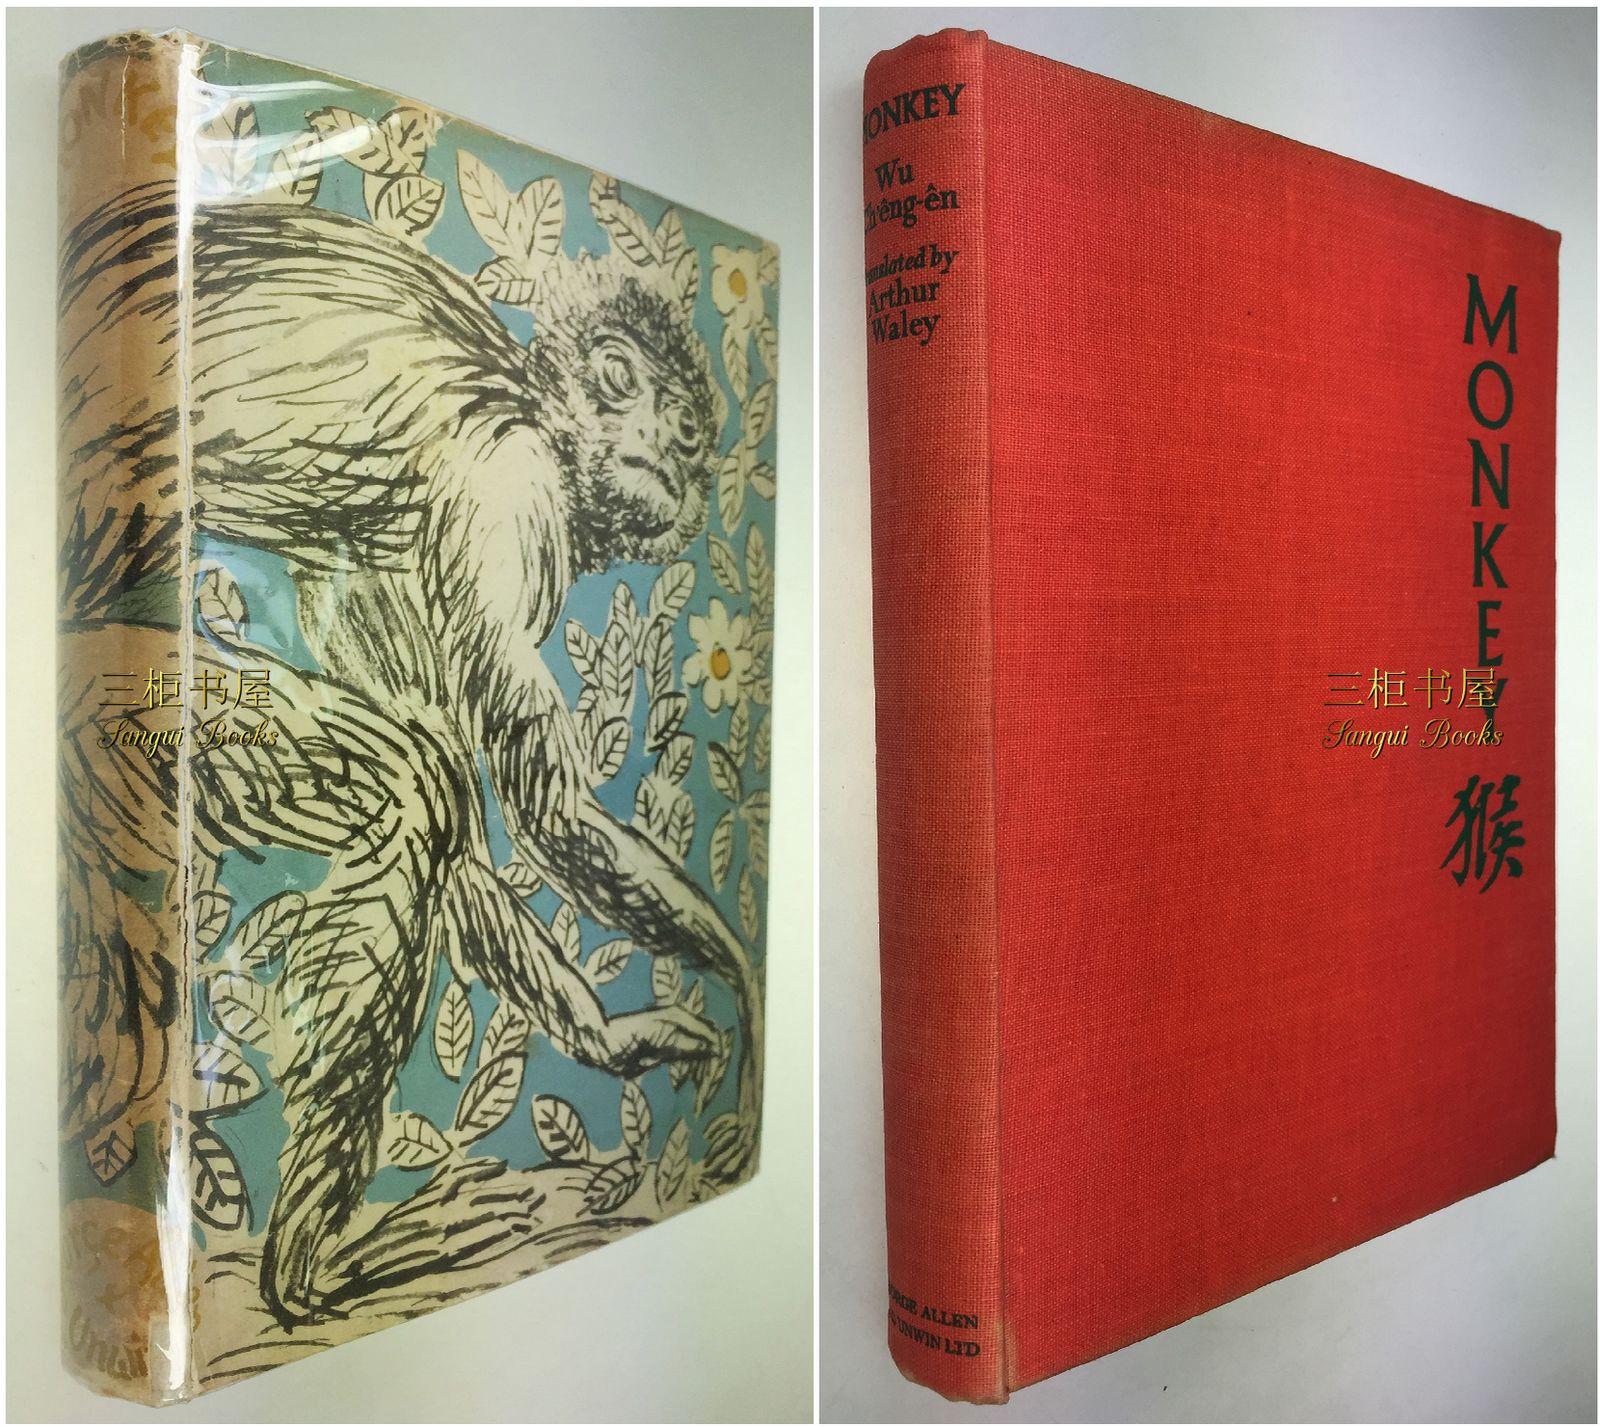 Old print of classic Chinese novel fetches